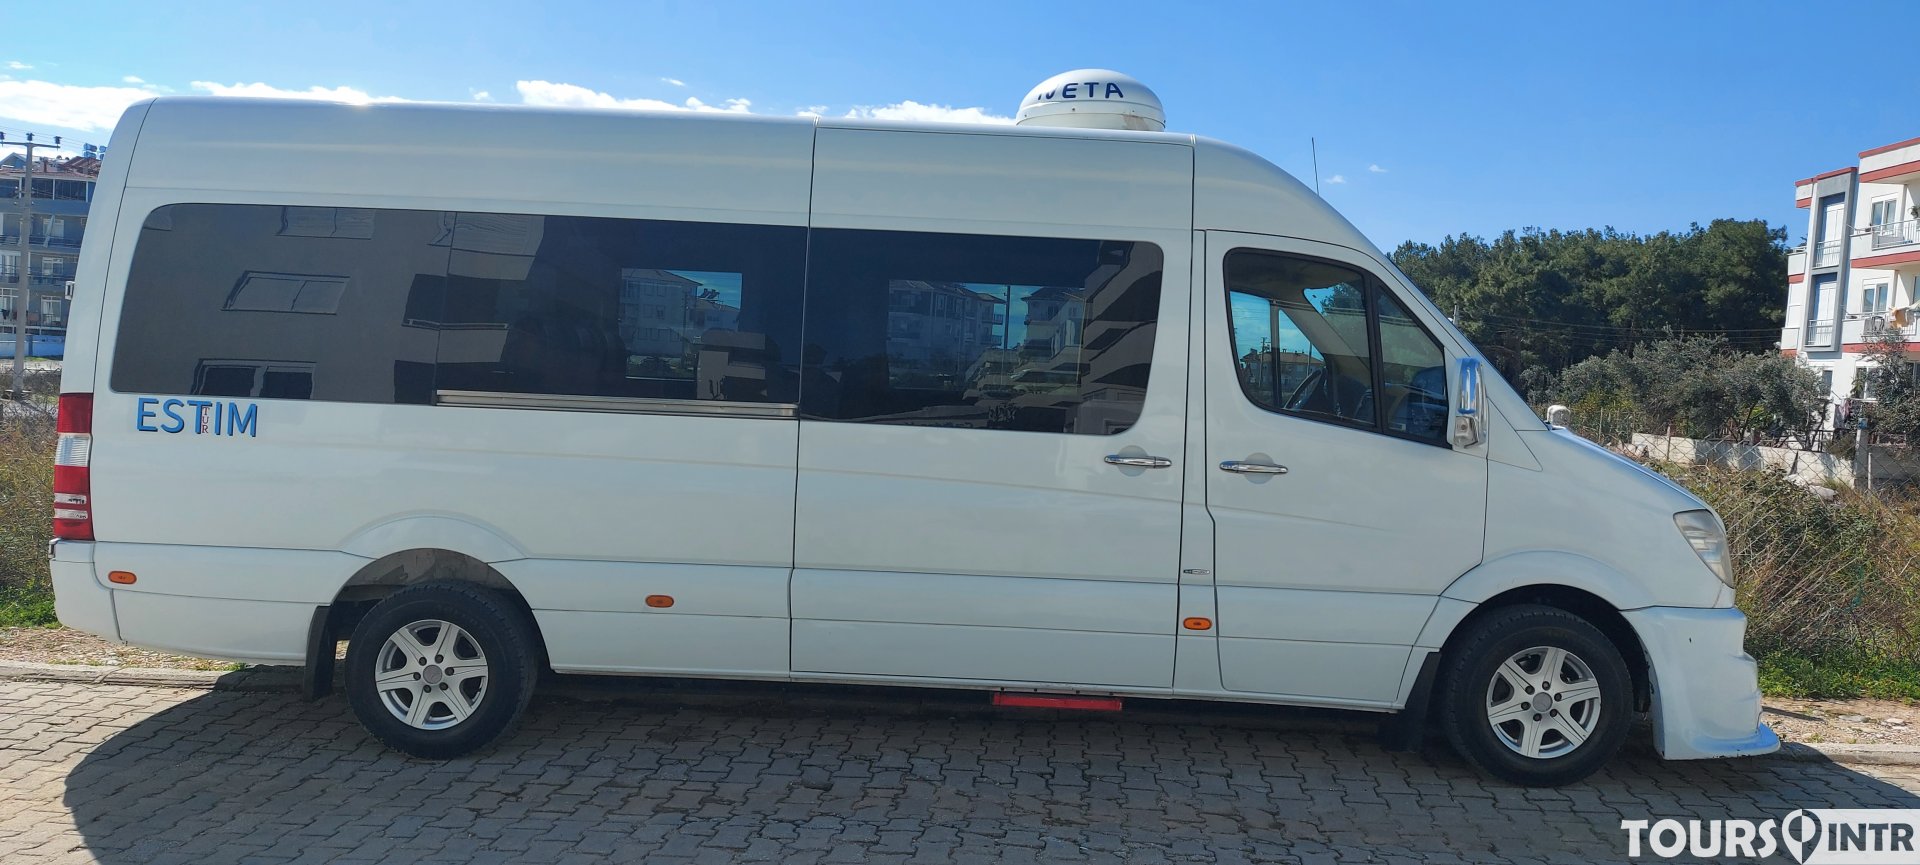 Our Airport Transfer and Private Tour Vehicle